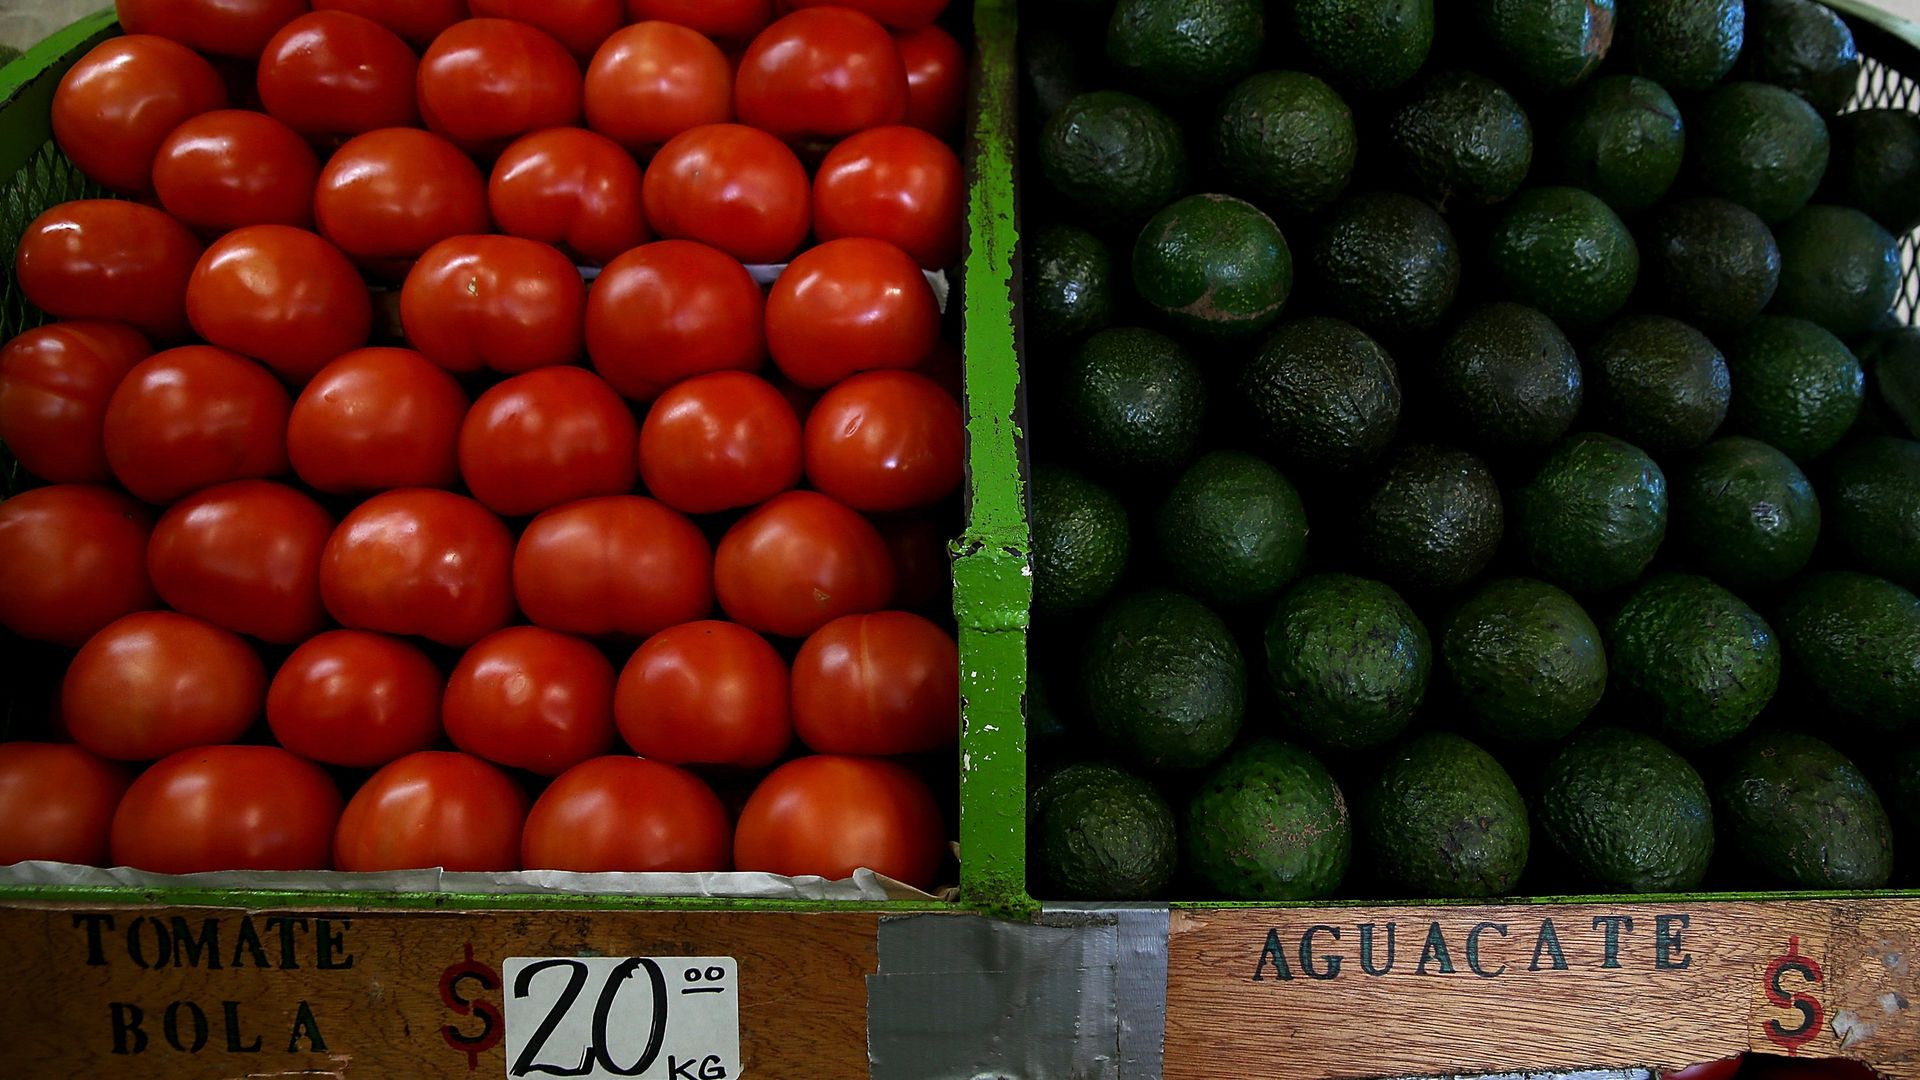 Tomatoes and avocados from mexico for sale.